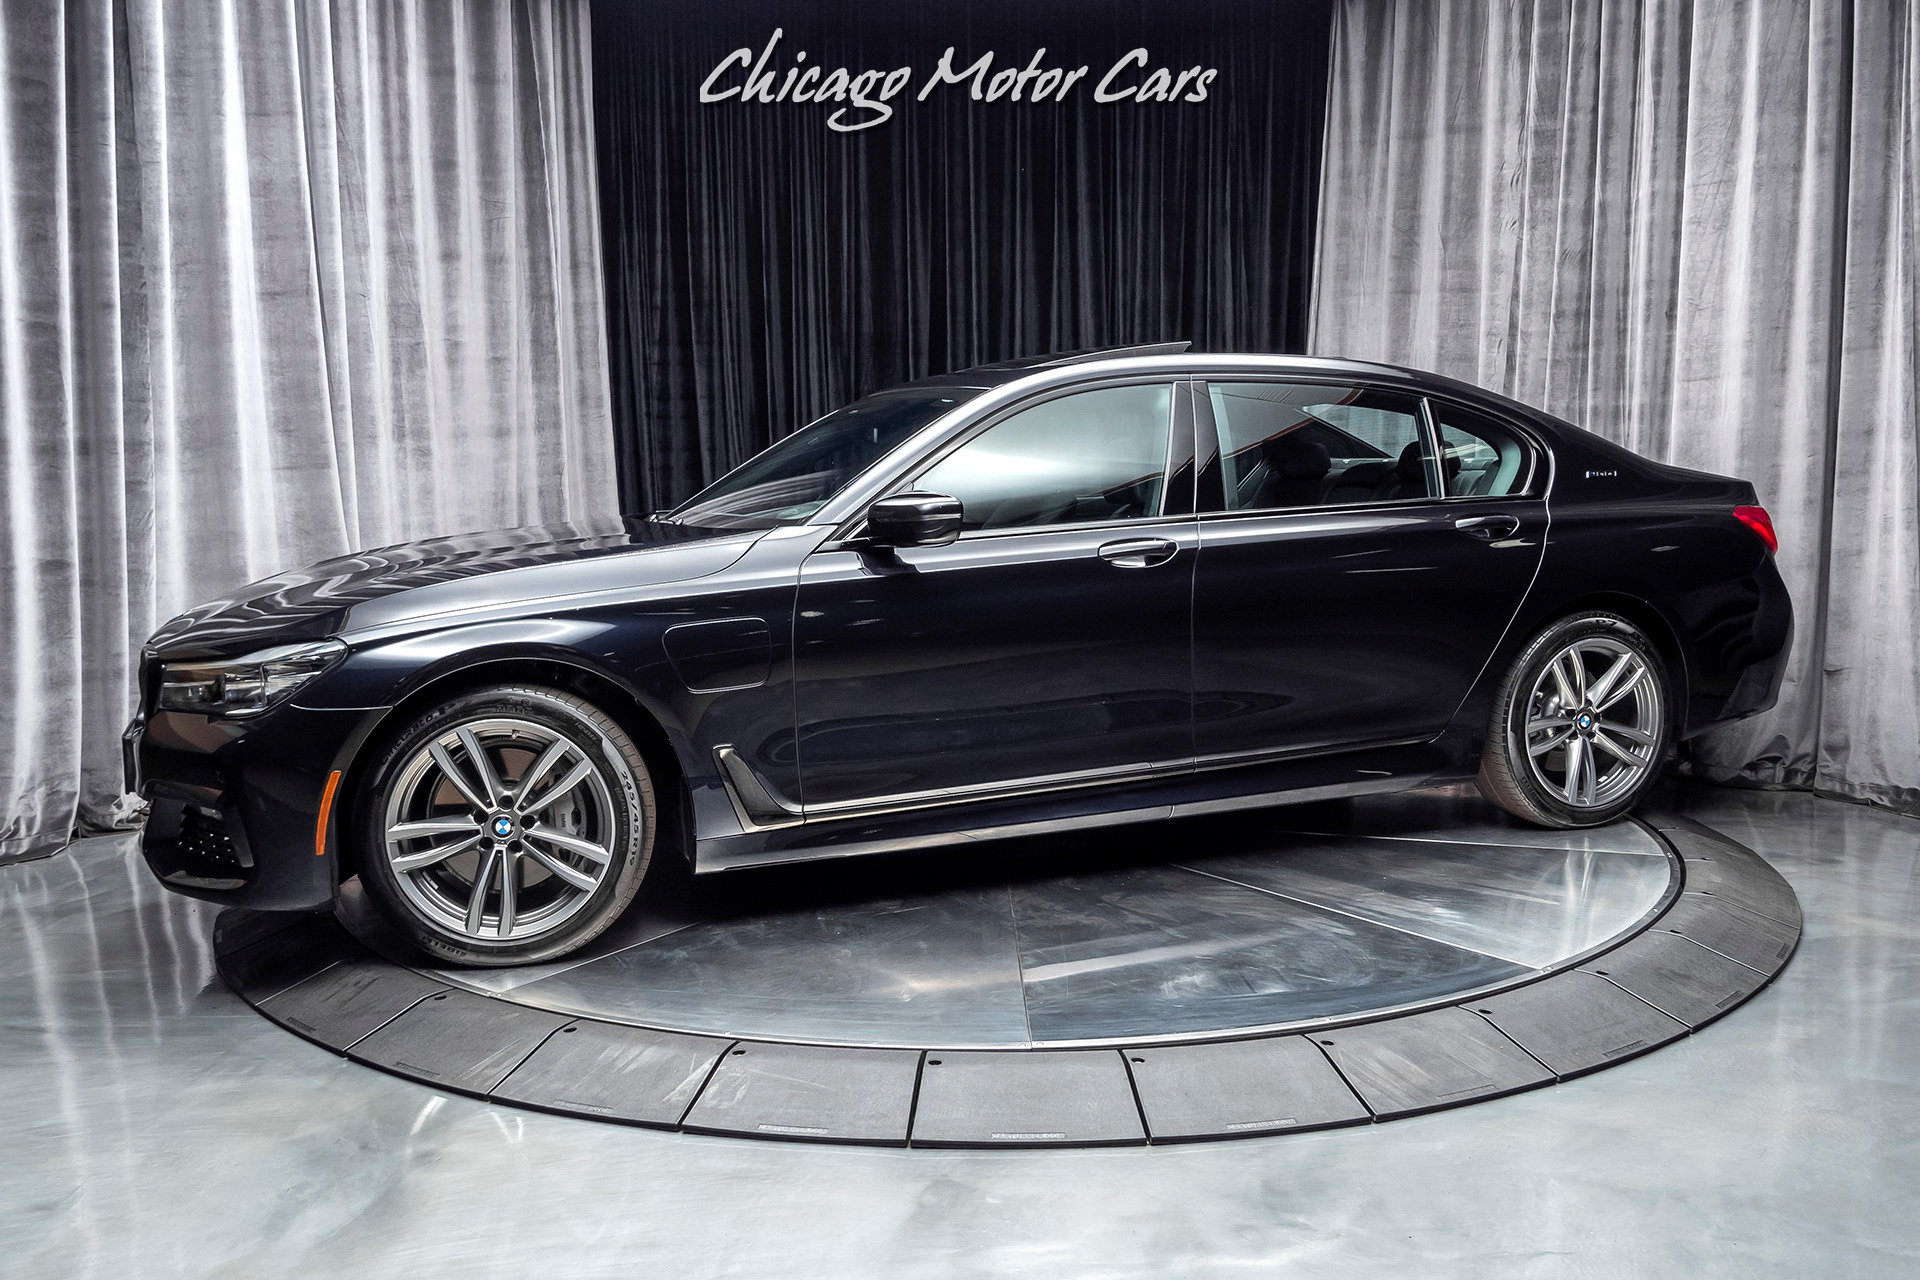 Used 2019 BMW 740e xDrive iPerformance M-Sport AWD *$100K ORIGINAL LIST*  For Sale (Special Pricing) | Chicago Motor Cars Stock #17153